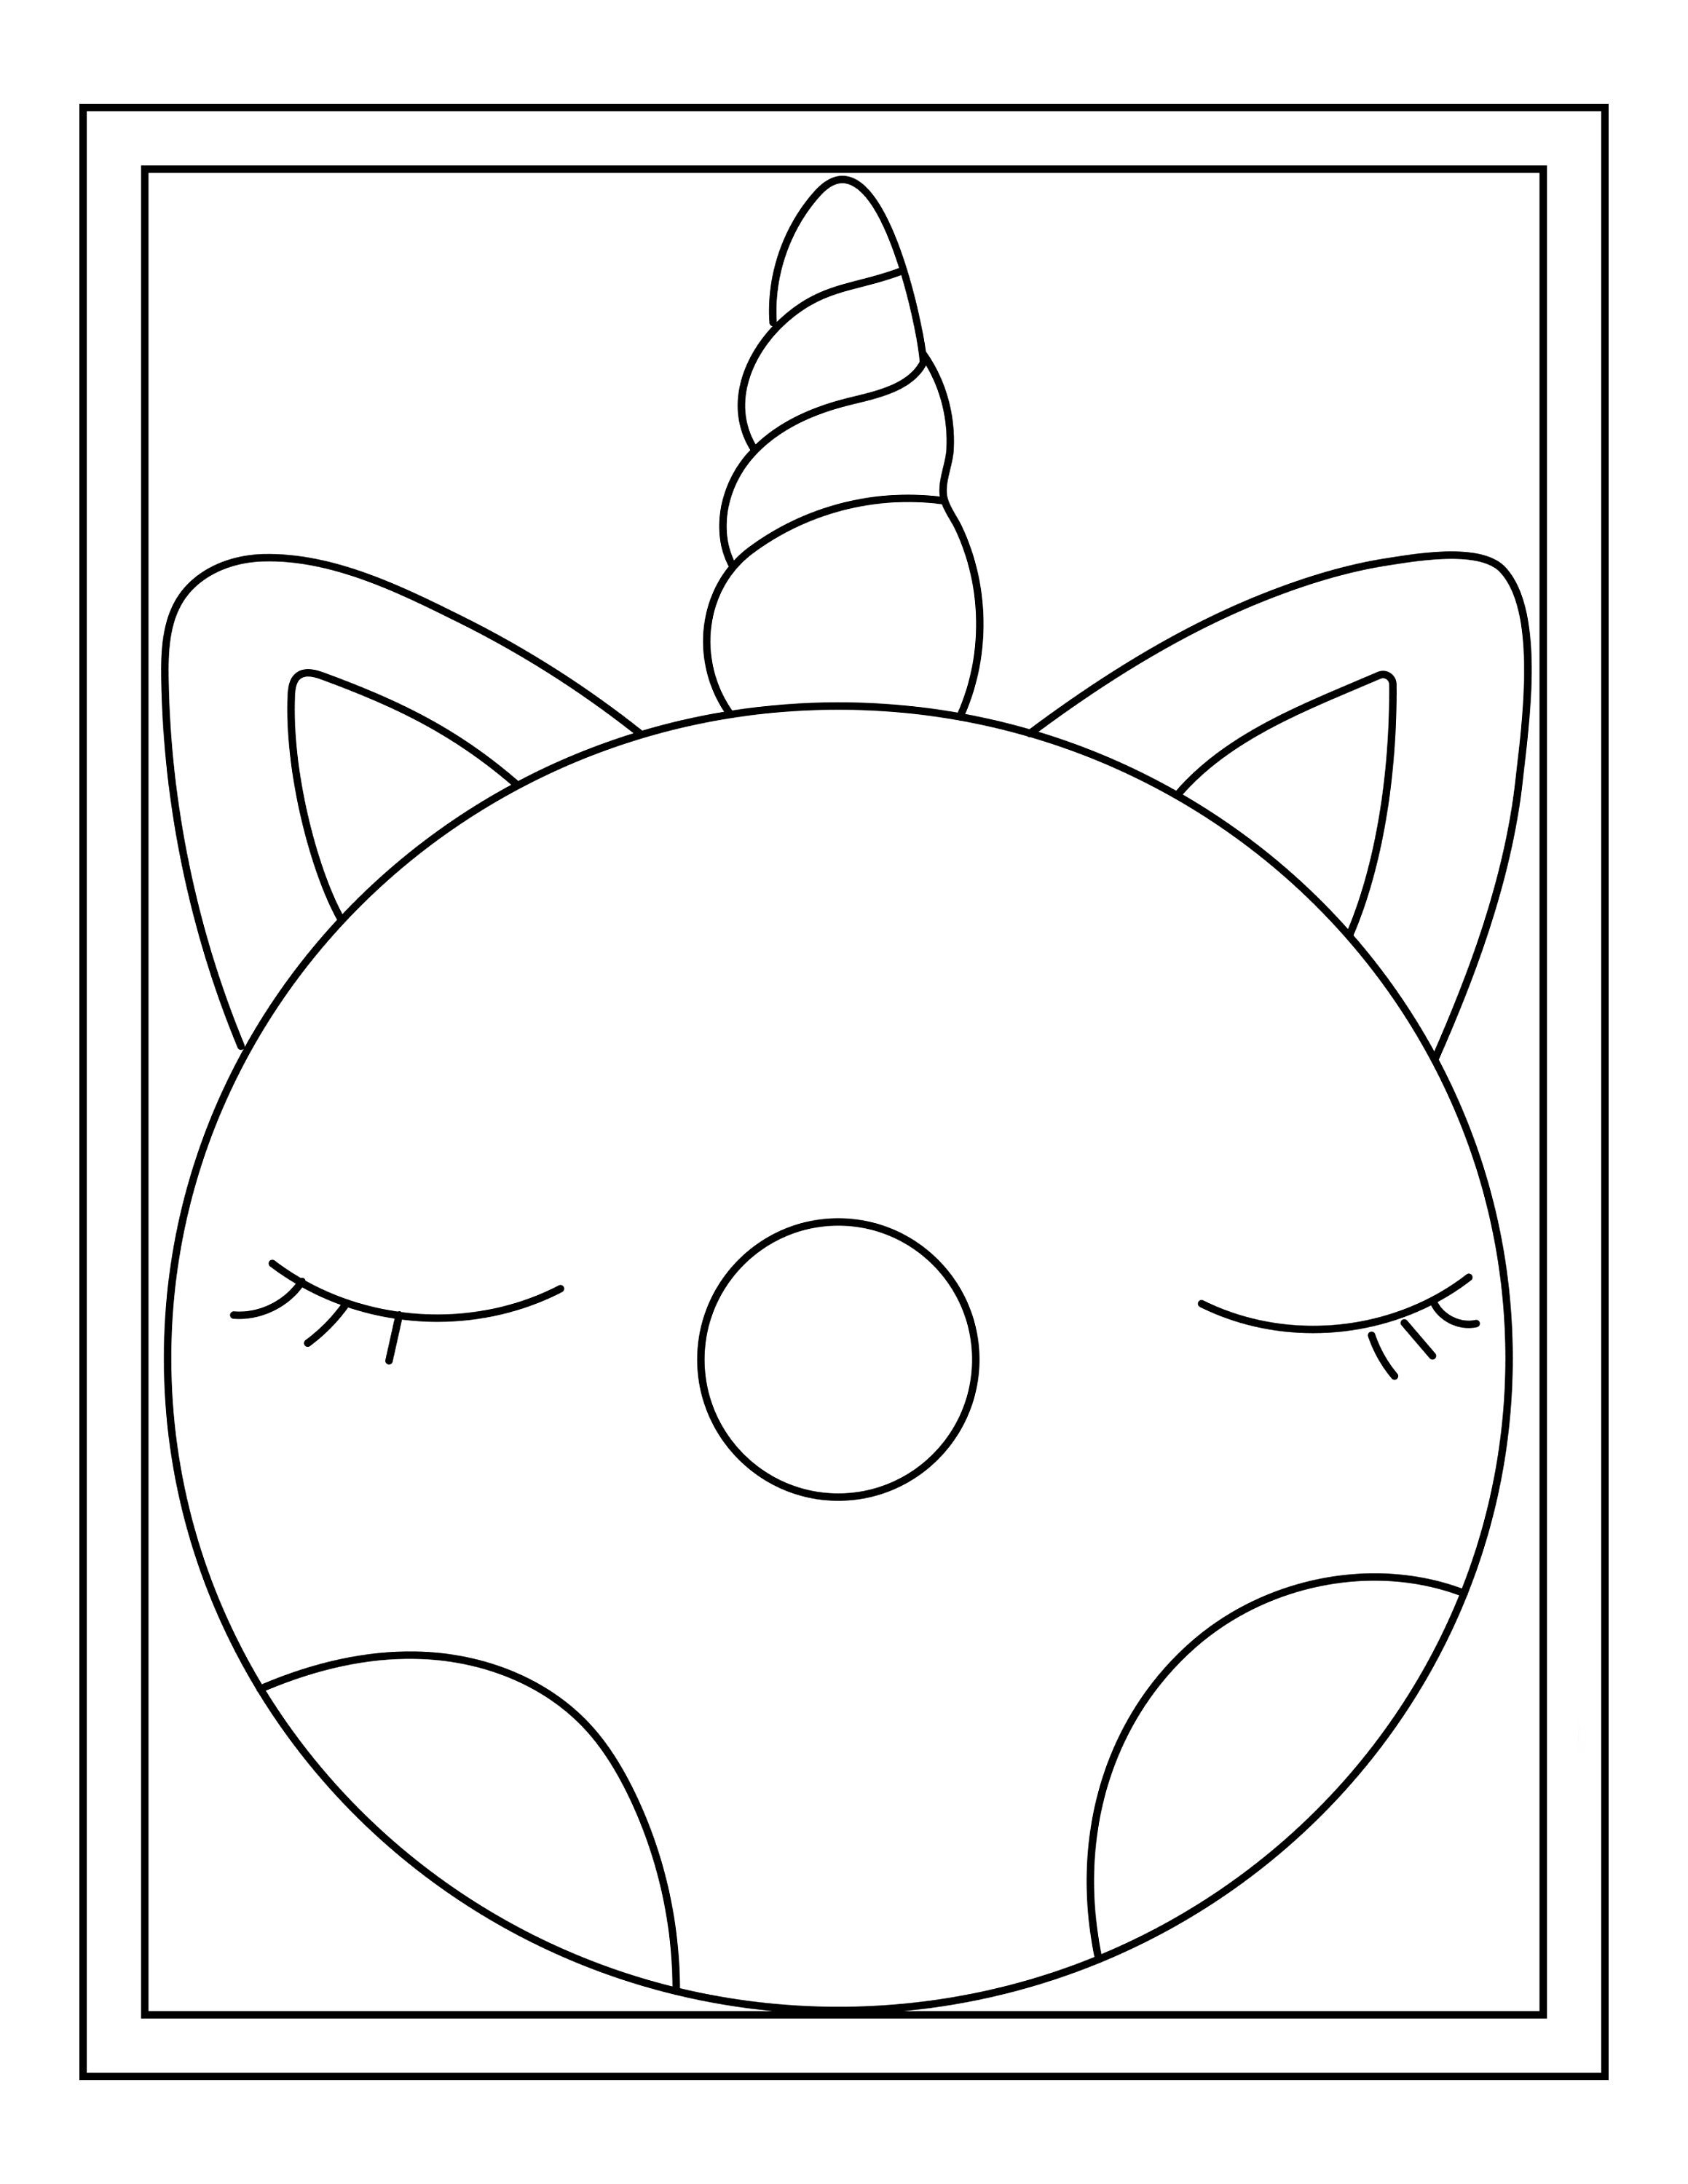 Squishy Printable 16 Coloring Pages - Etsy